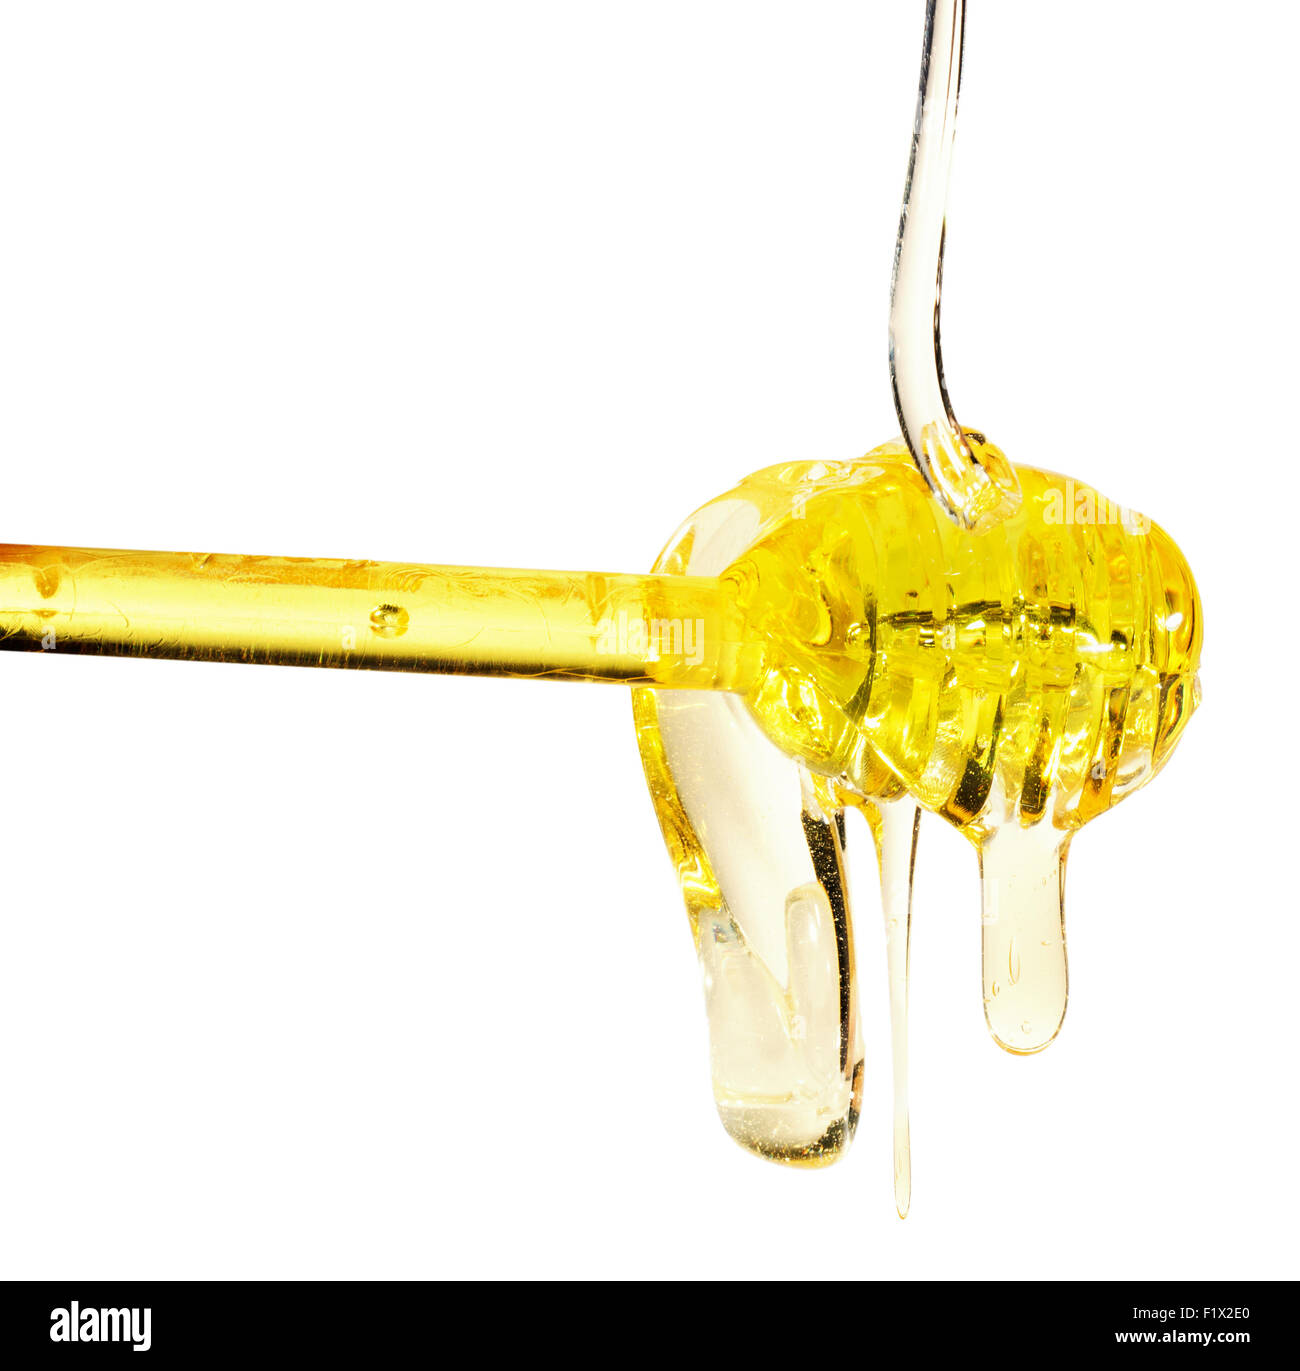 Honey dripping from a spoon on white background. Stock Photo